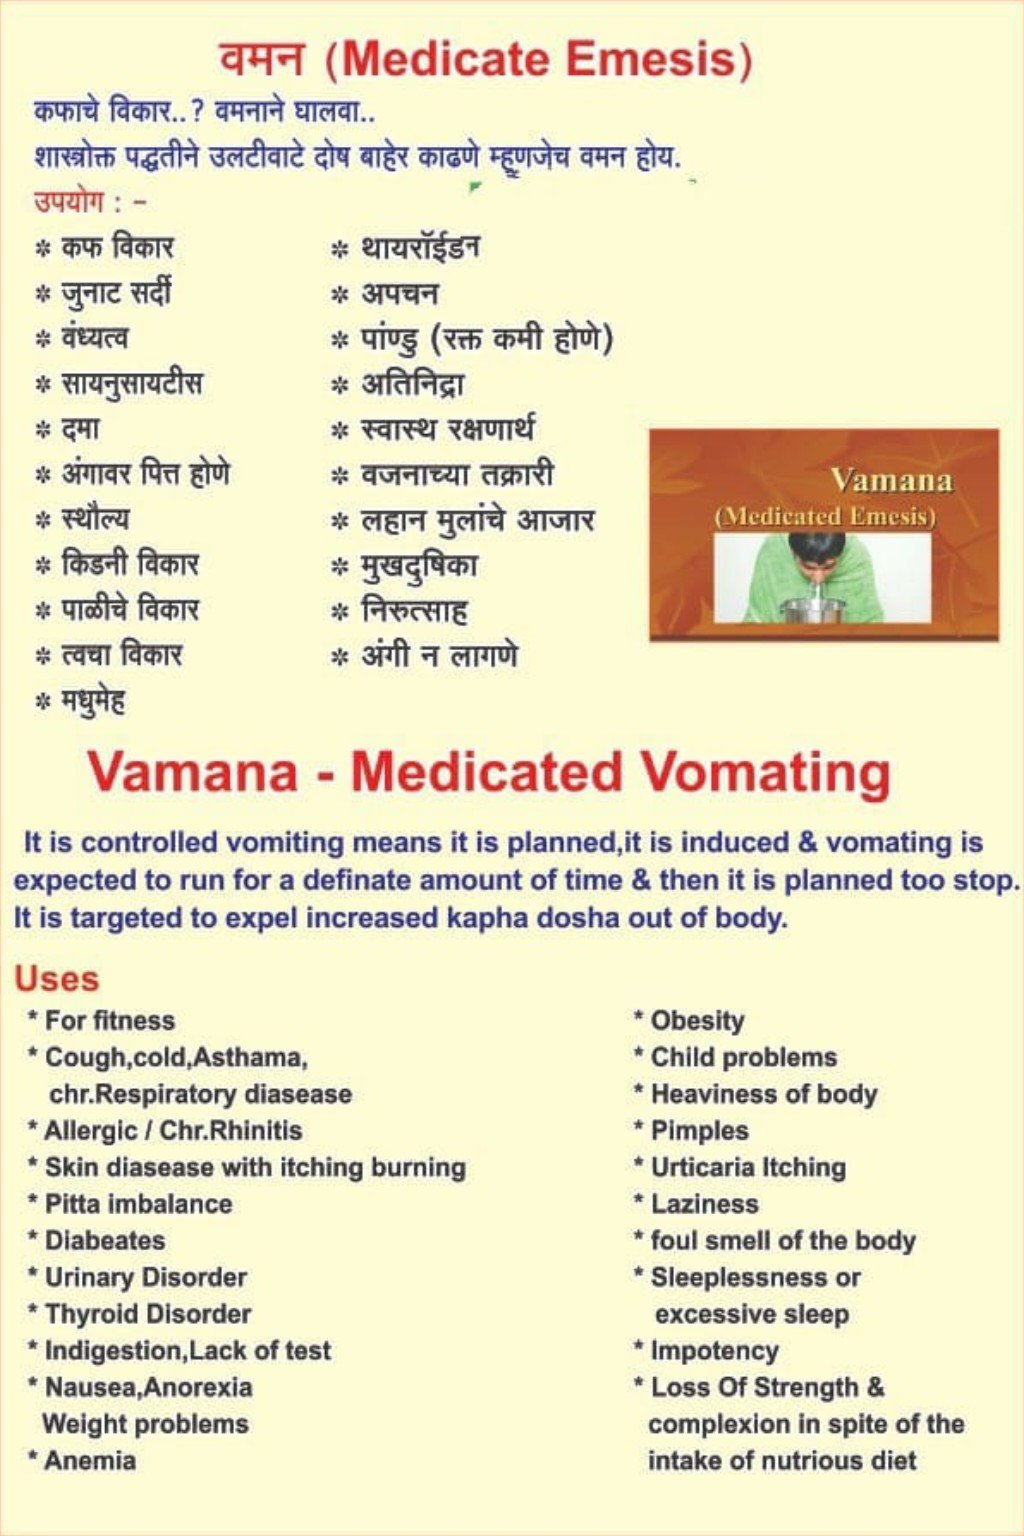 Many problems including asthma, thyroid, skin disorders will be removed due to Vasantika Vamana!